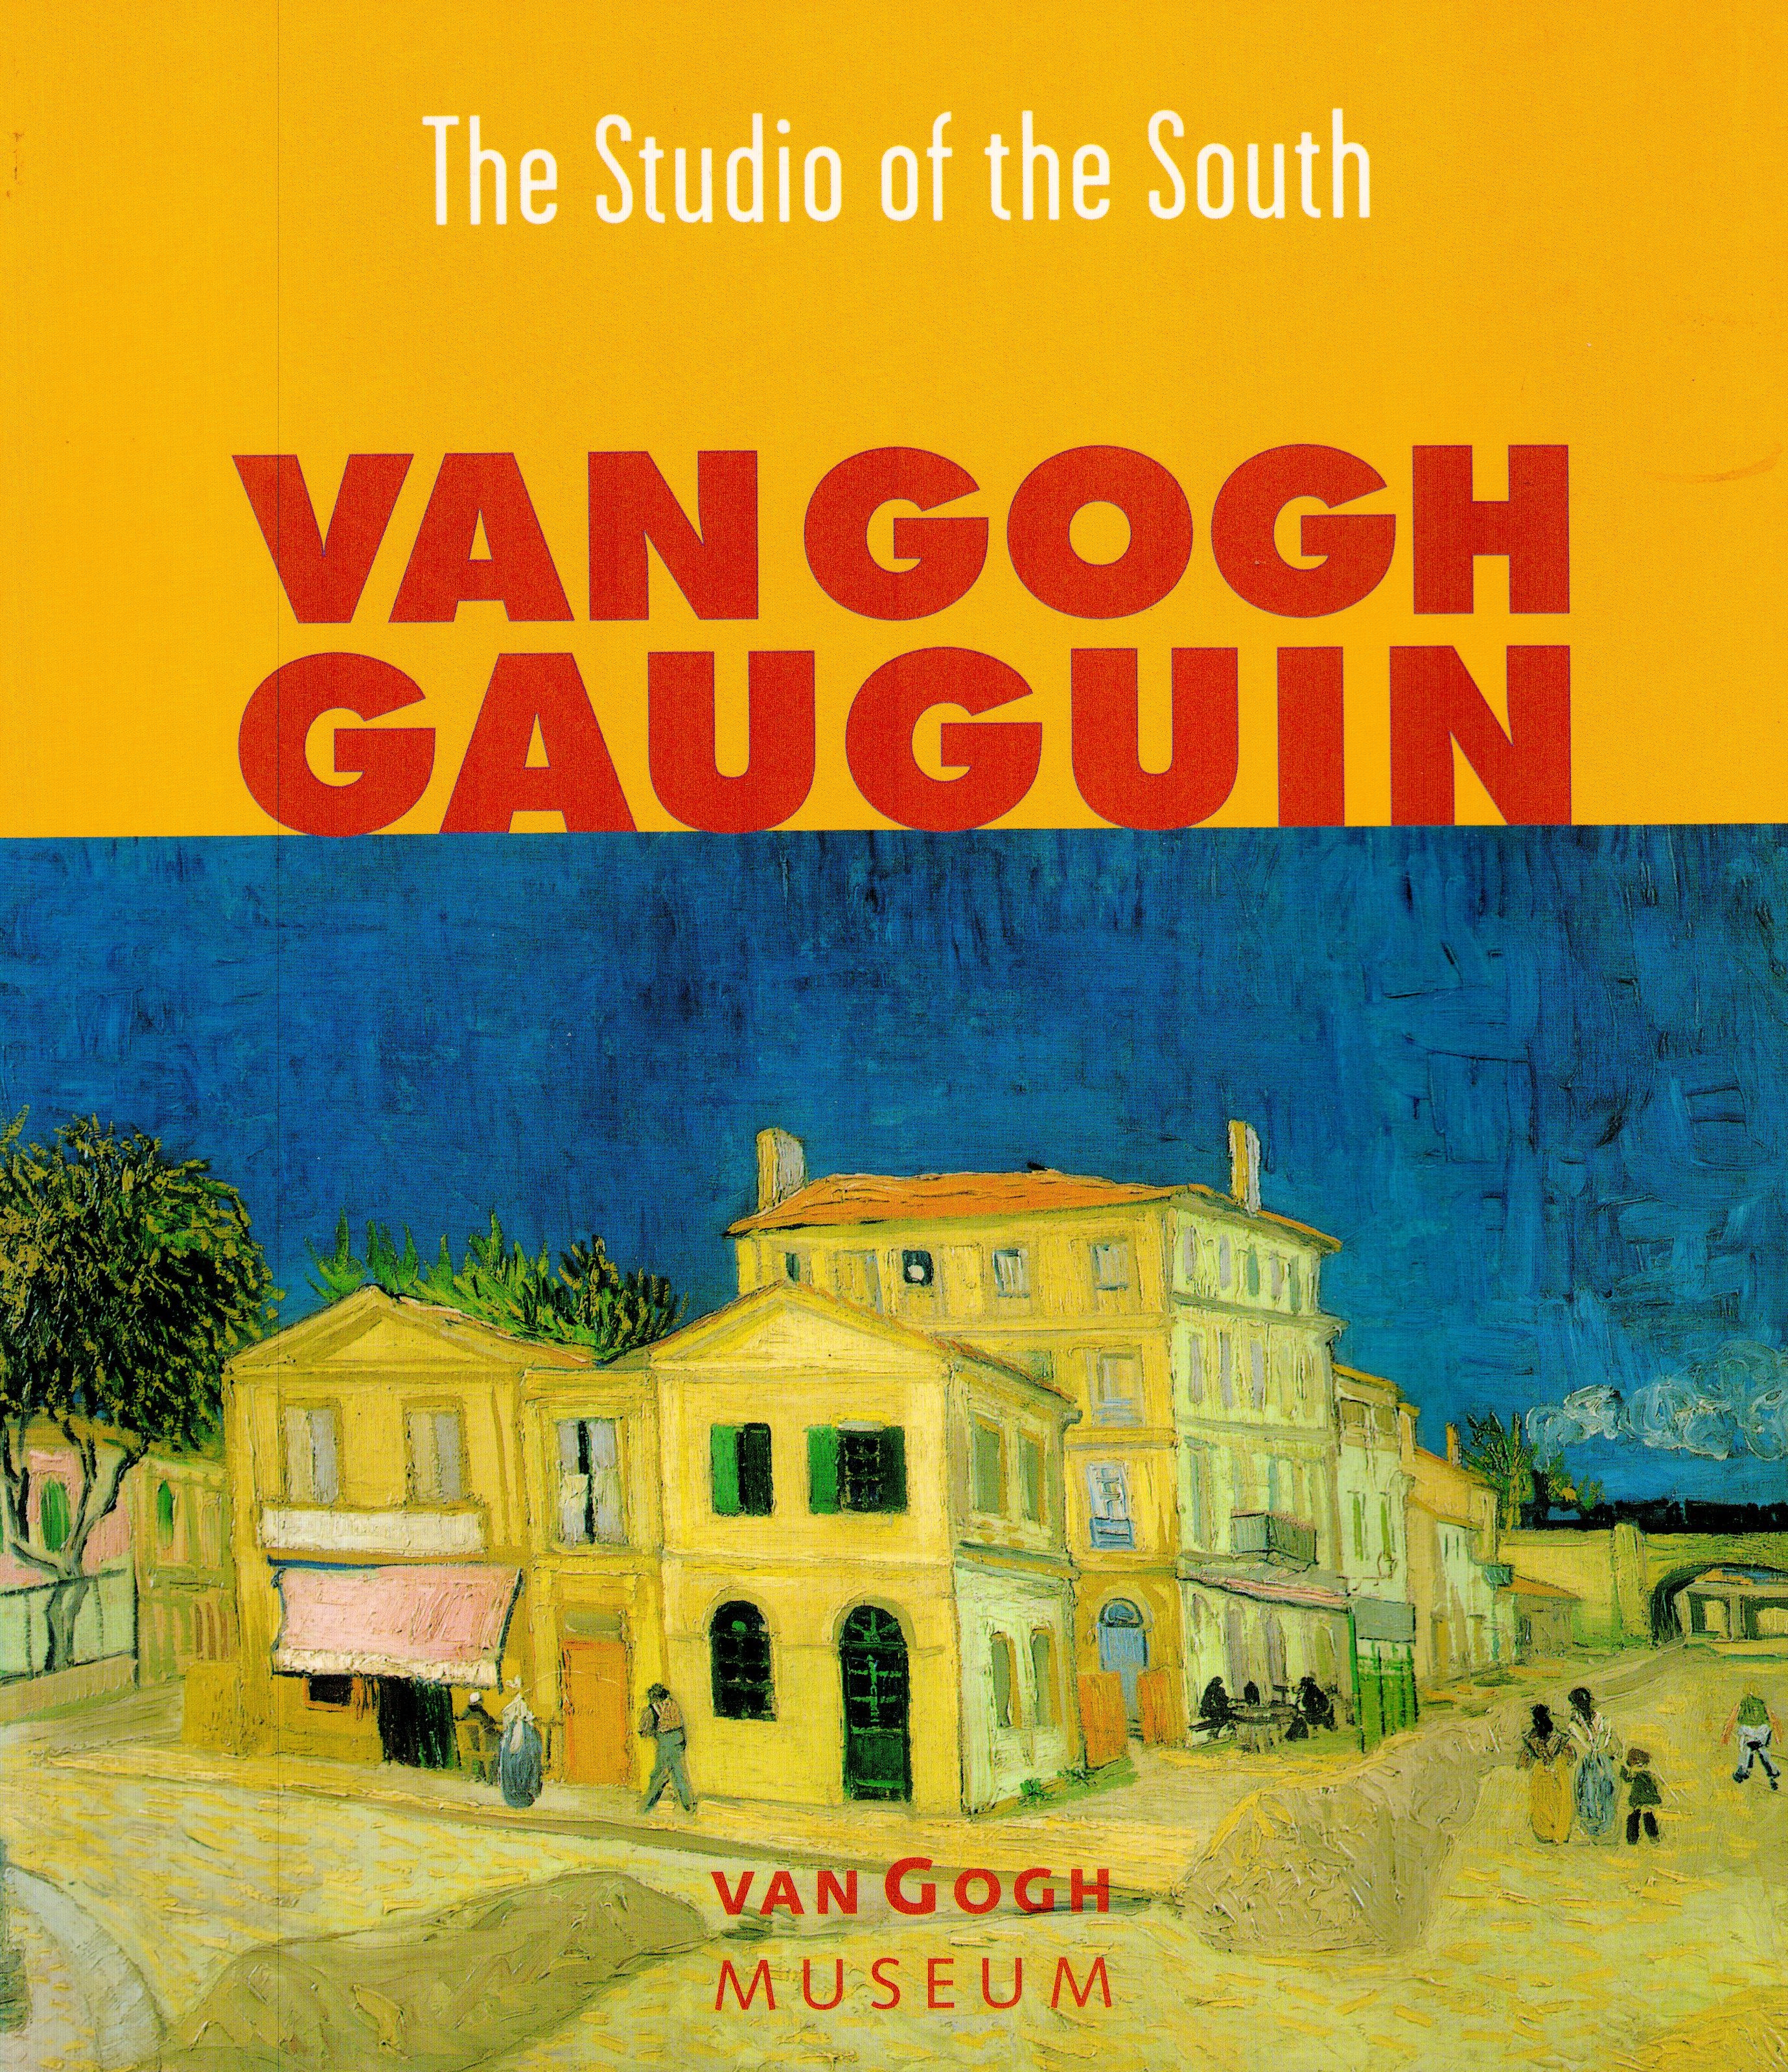 The Studio of the South Van Gogh Gauguin Softback Book 2001 First Edition published by The Van